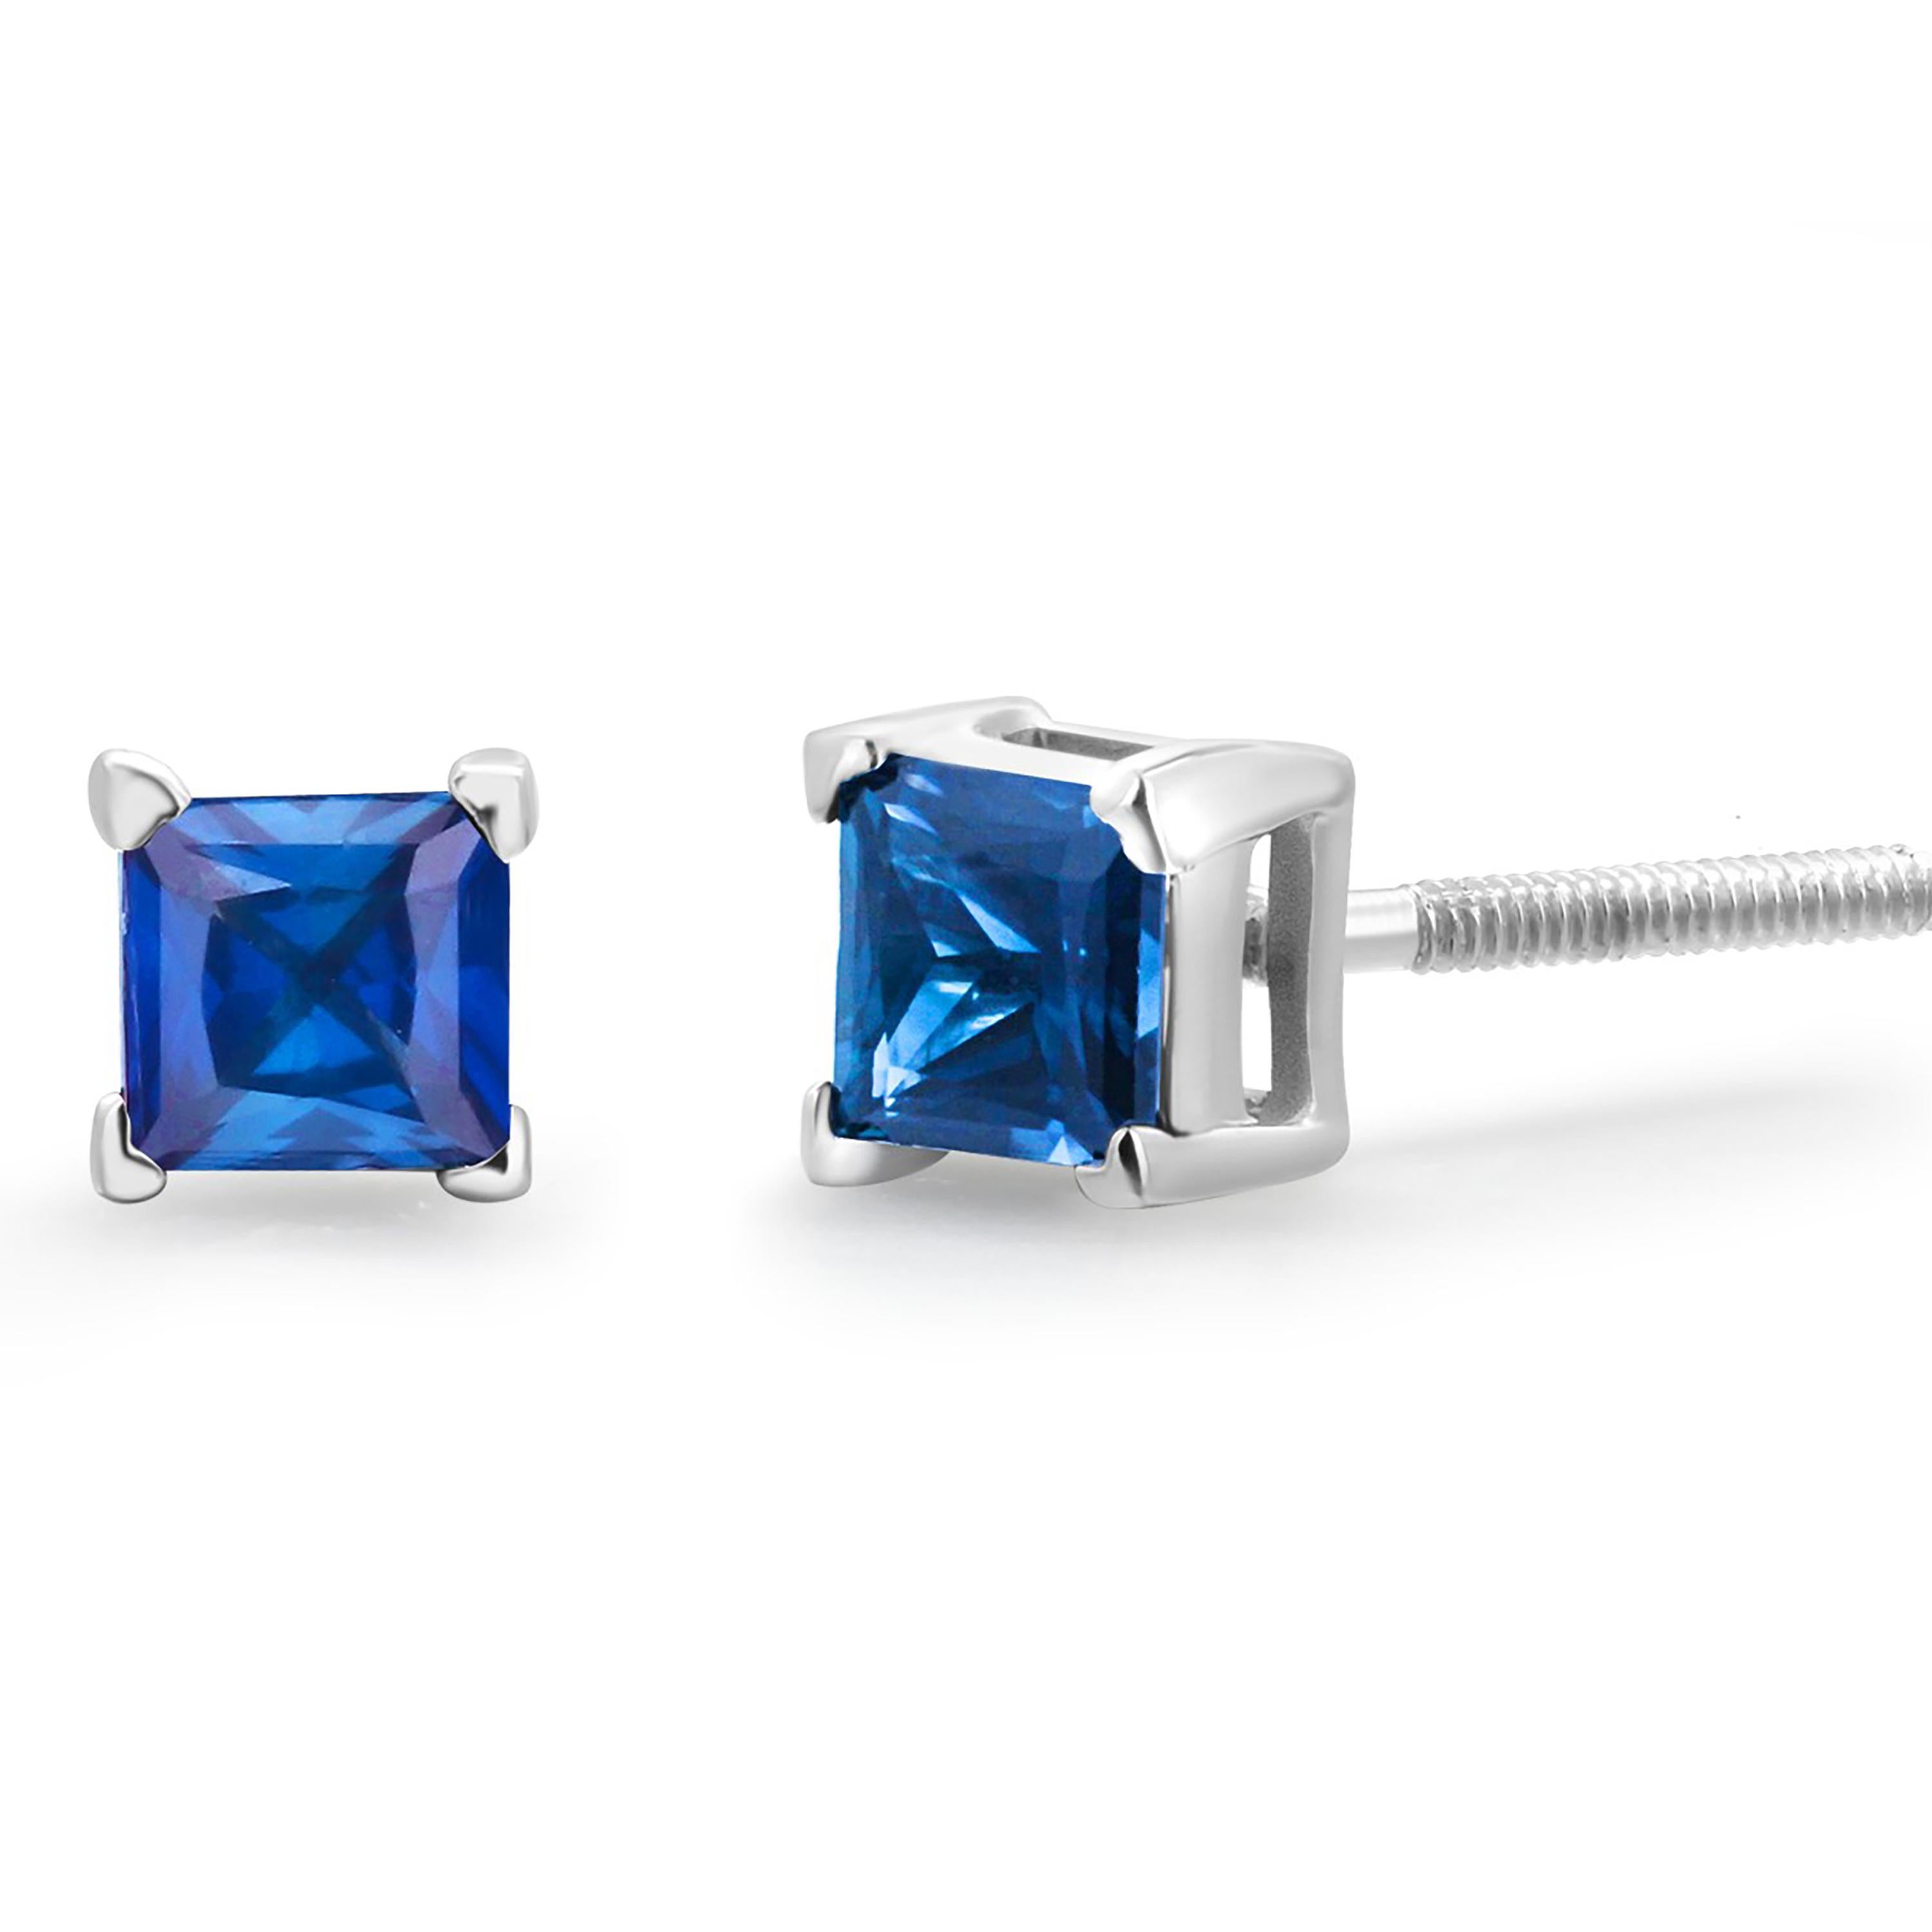 Elegant 14 Karat White Gold Square Sapphire Stud Earrings 0.85 Carats Screw Back In New Condition For Sale In New York, NY